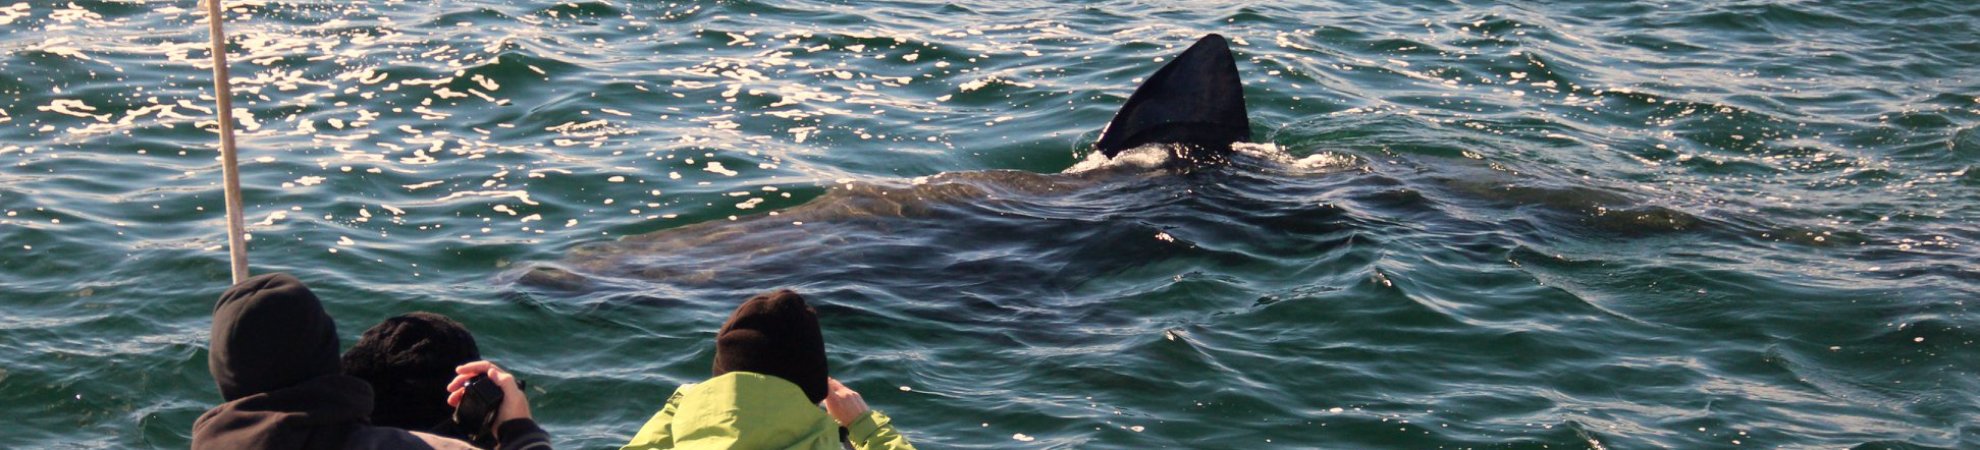 Whale Watching in Ireland